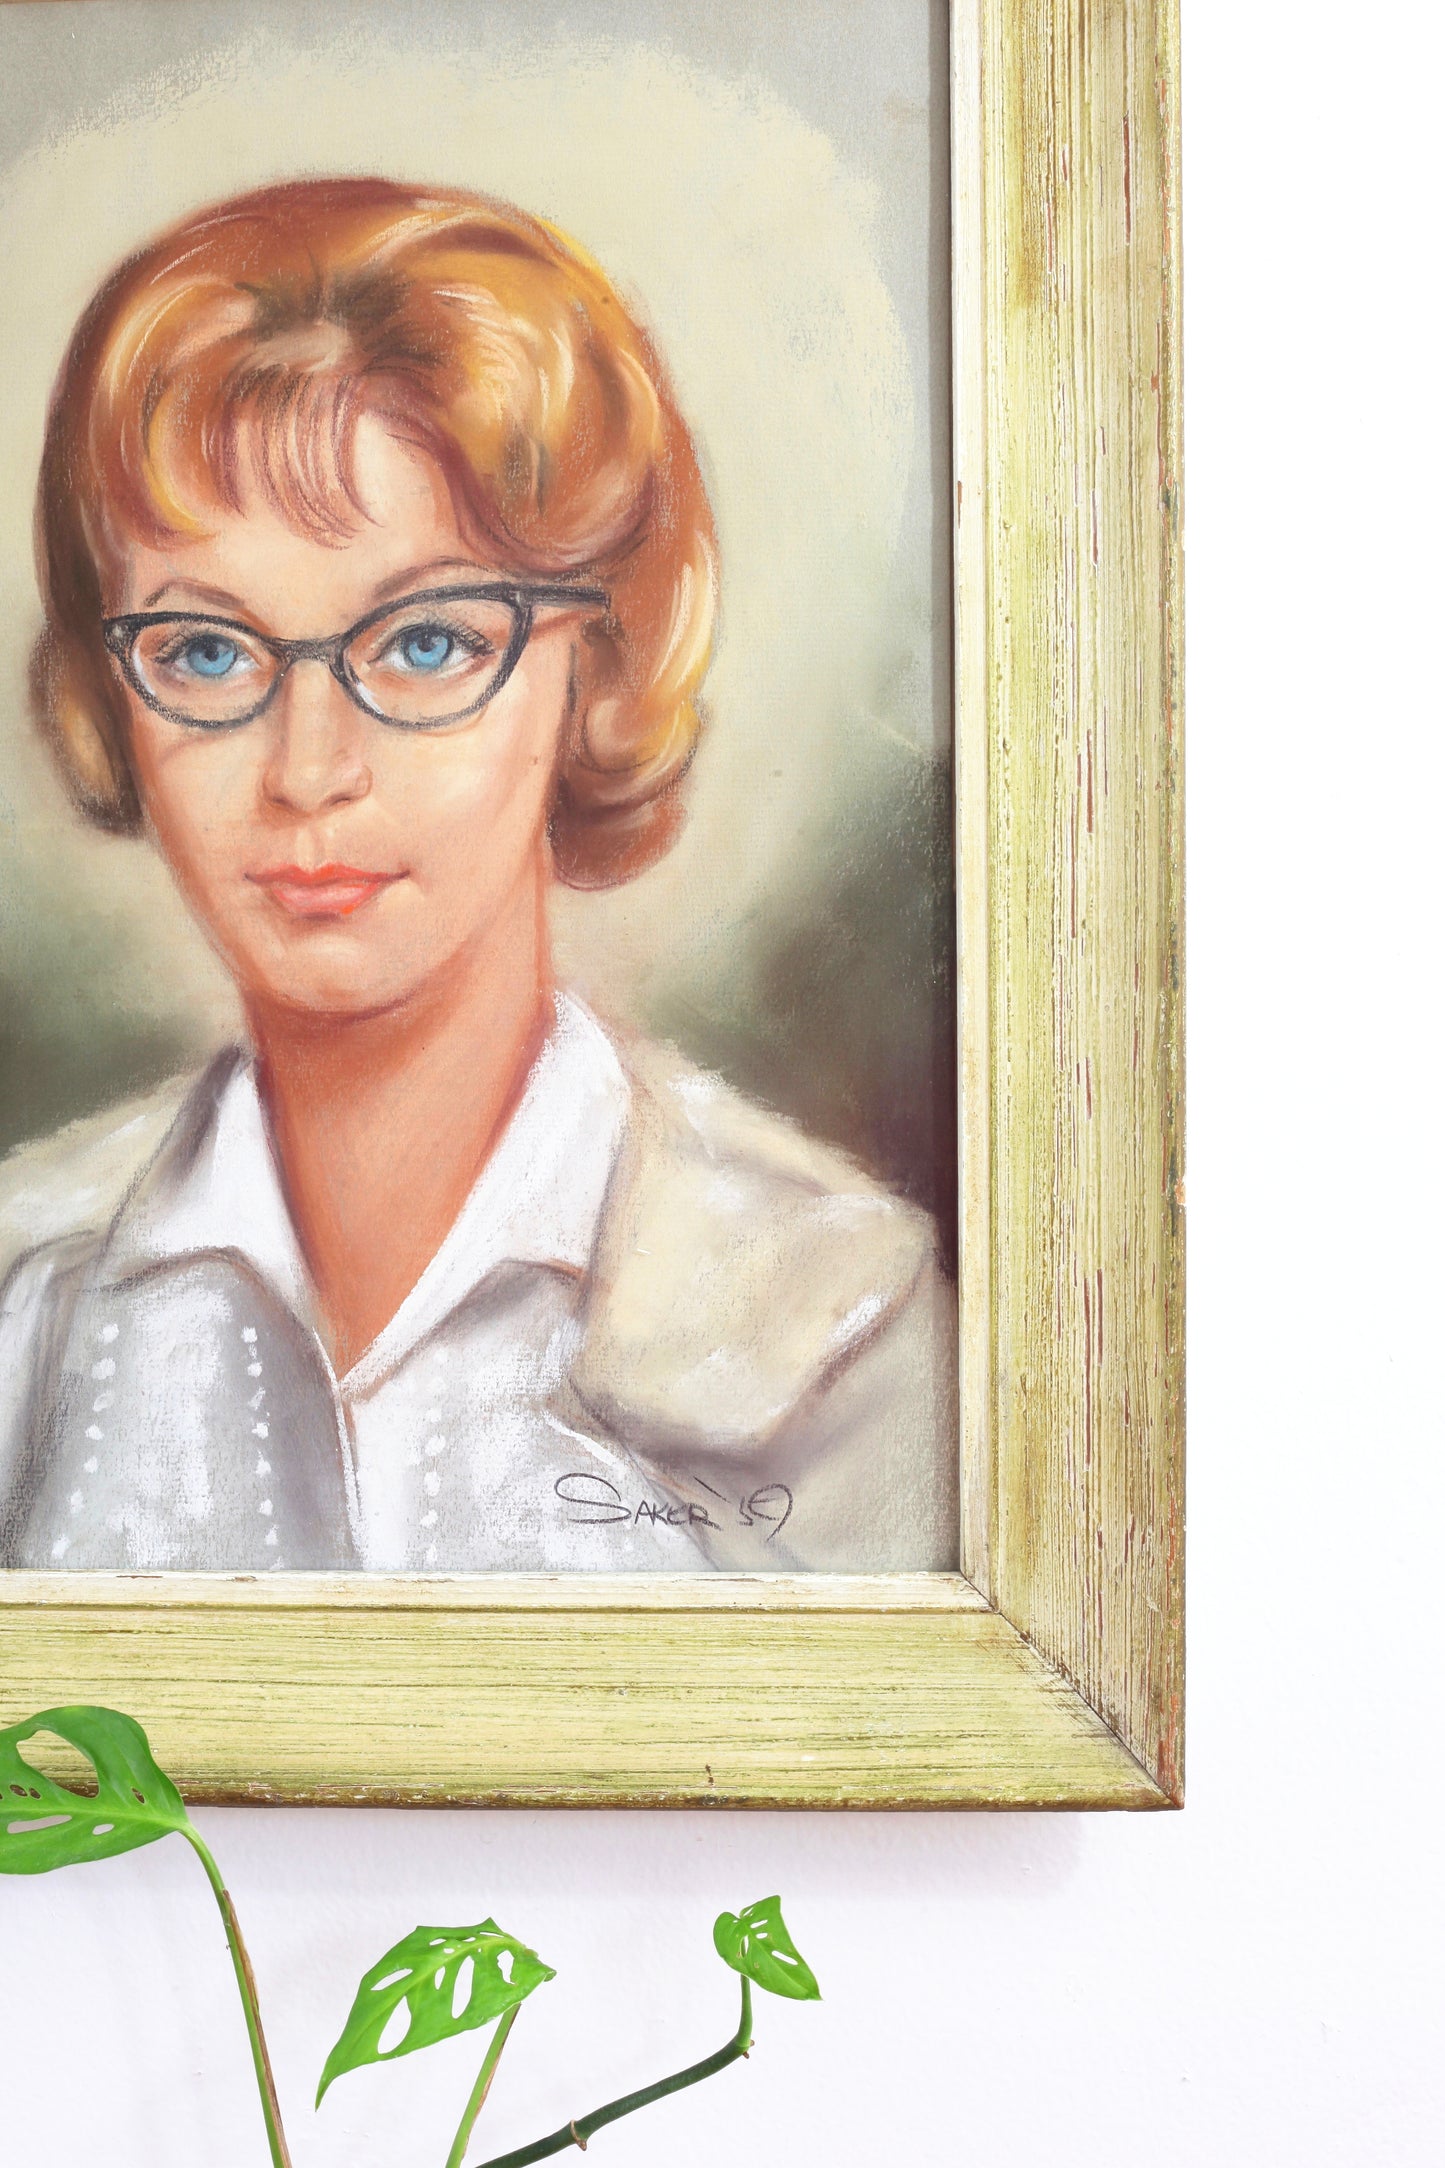 SOLD - Vintage 1959 Original Pastel Portrait of Woman in Cat Eye Glasses *FREE US Shipping*